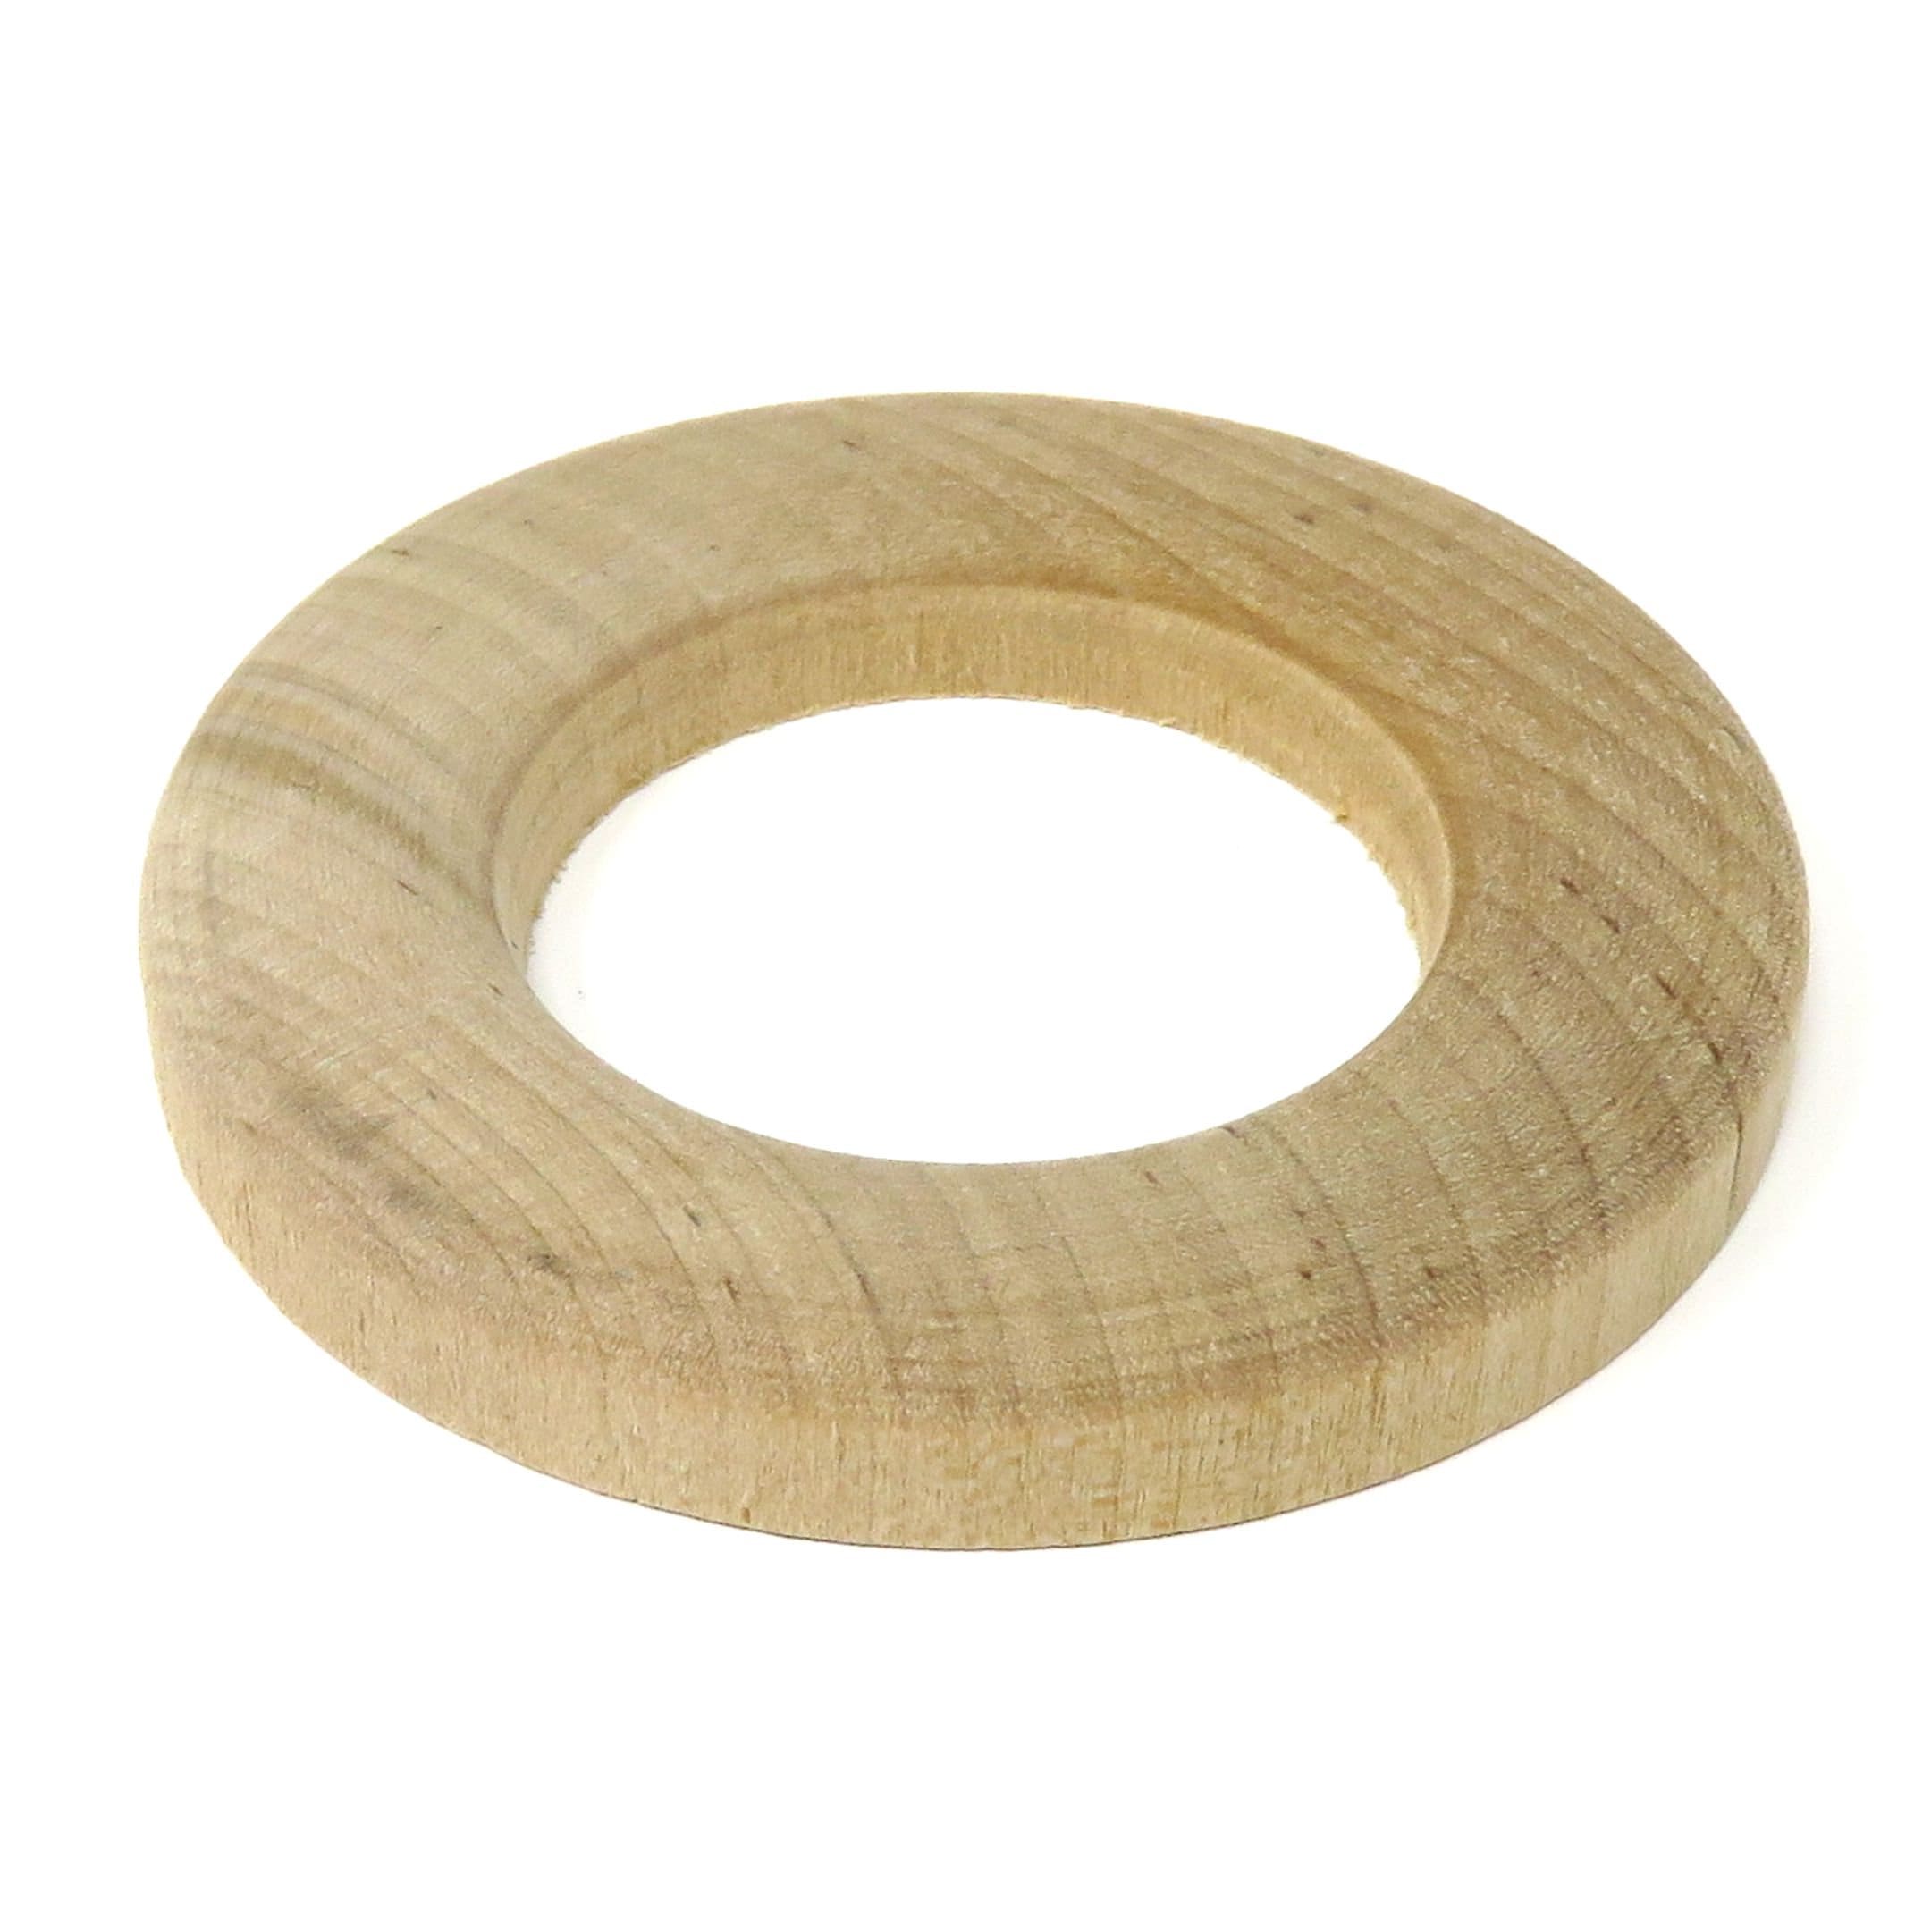 20 Wooden Rings Brown Small Wood Rings Large Hole Wood Donut Wood Rings for  Jewelry Wood Rings for Crafts 12mm 